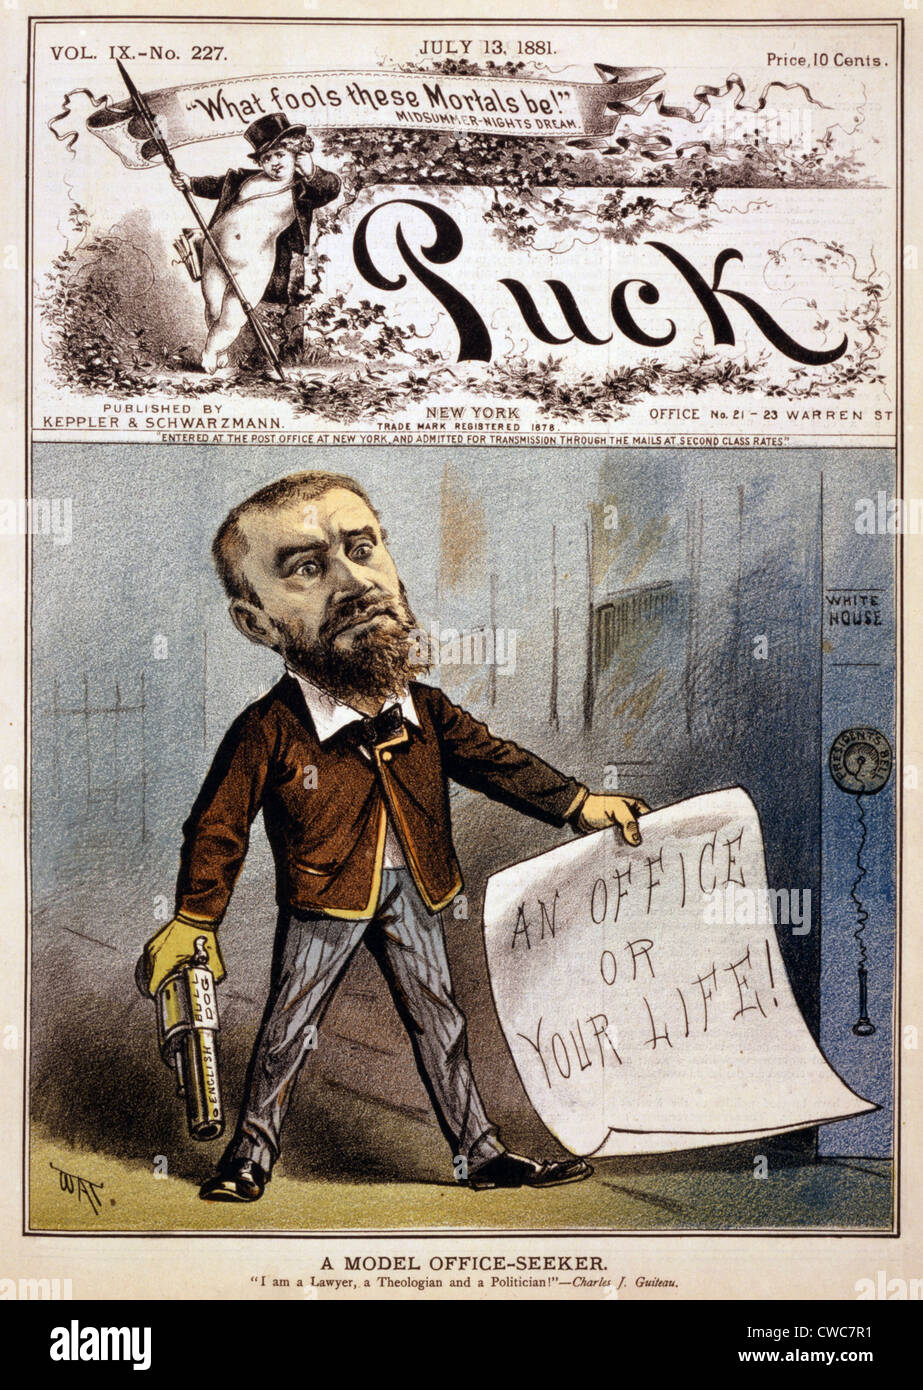 Cartoon showing presidential assassin Charles J. Guiteau holding pistol and paper reading an office or your life 1881 Stock Photo